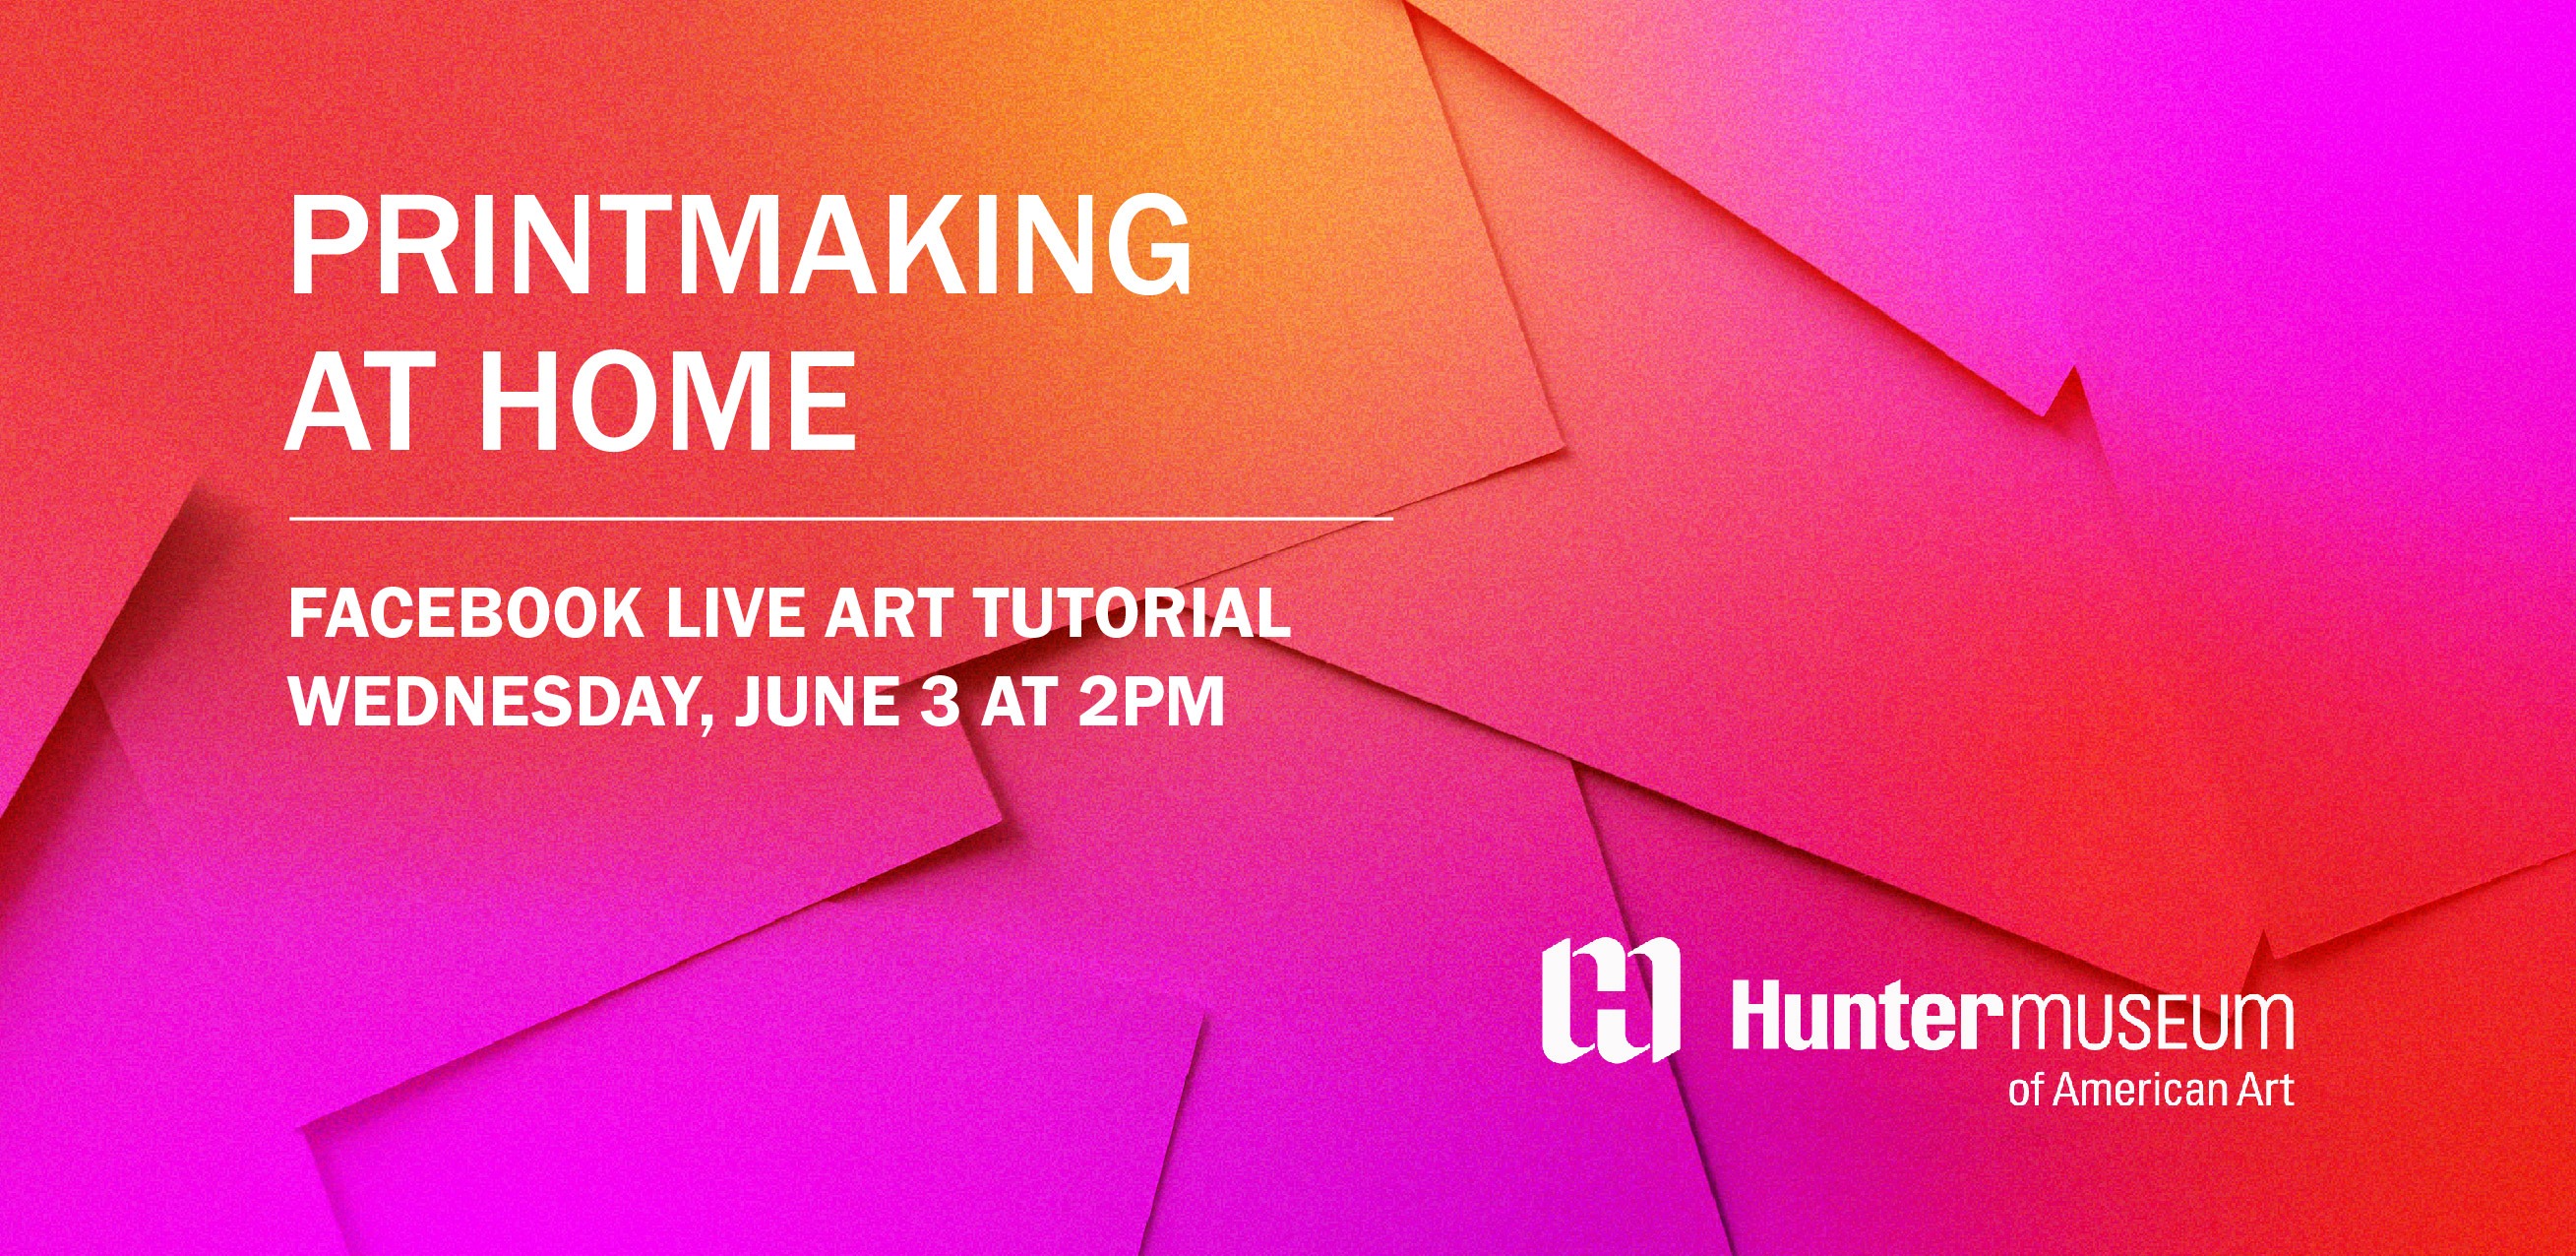 Sheets of paper overlaid with vibrant pink and orange. Text reads, "Facebook Live art tutorial Wednesday, June 3 at 2 PM."